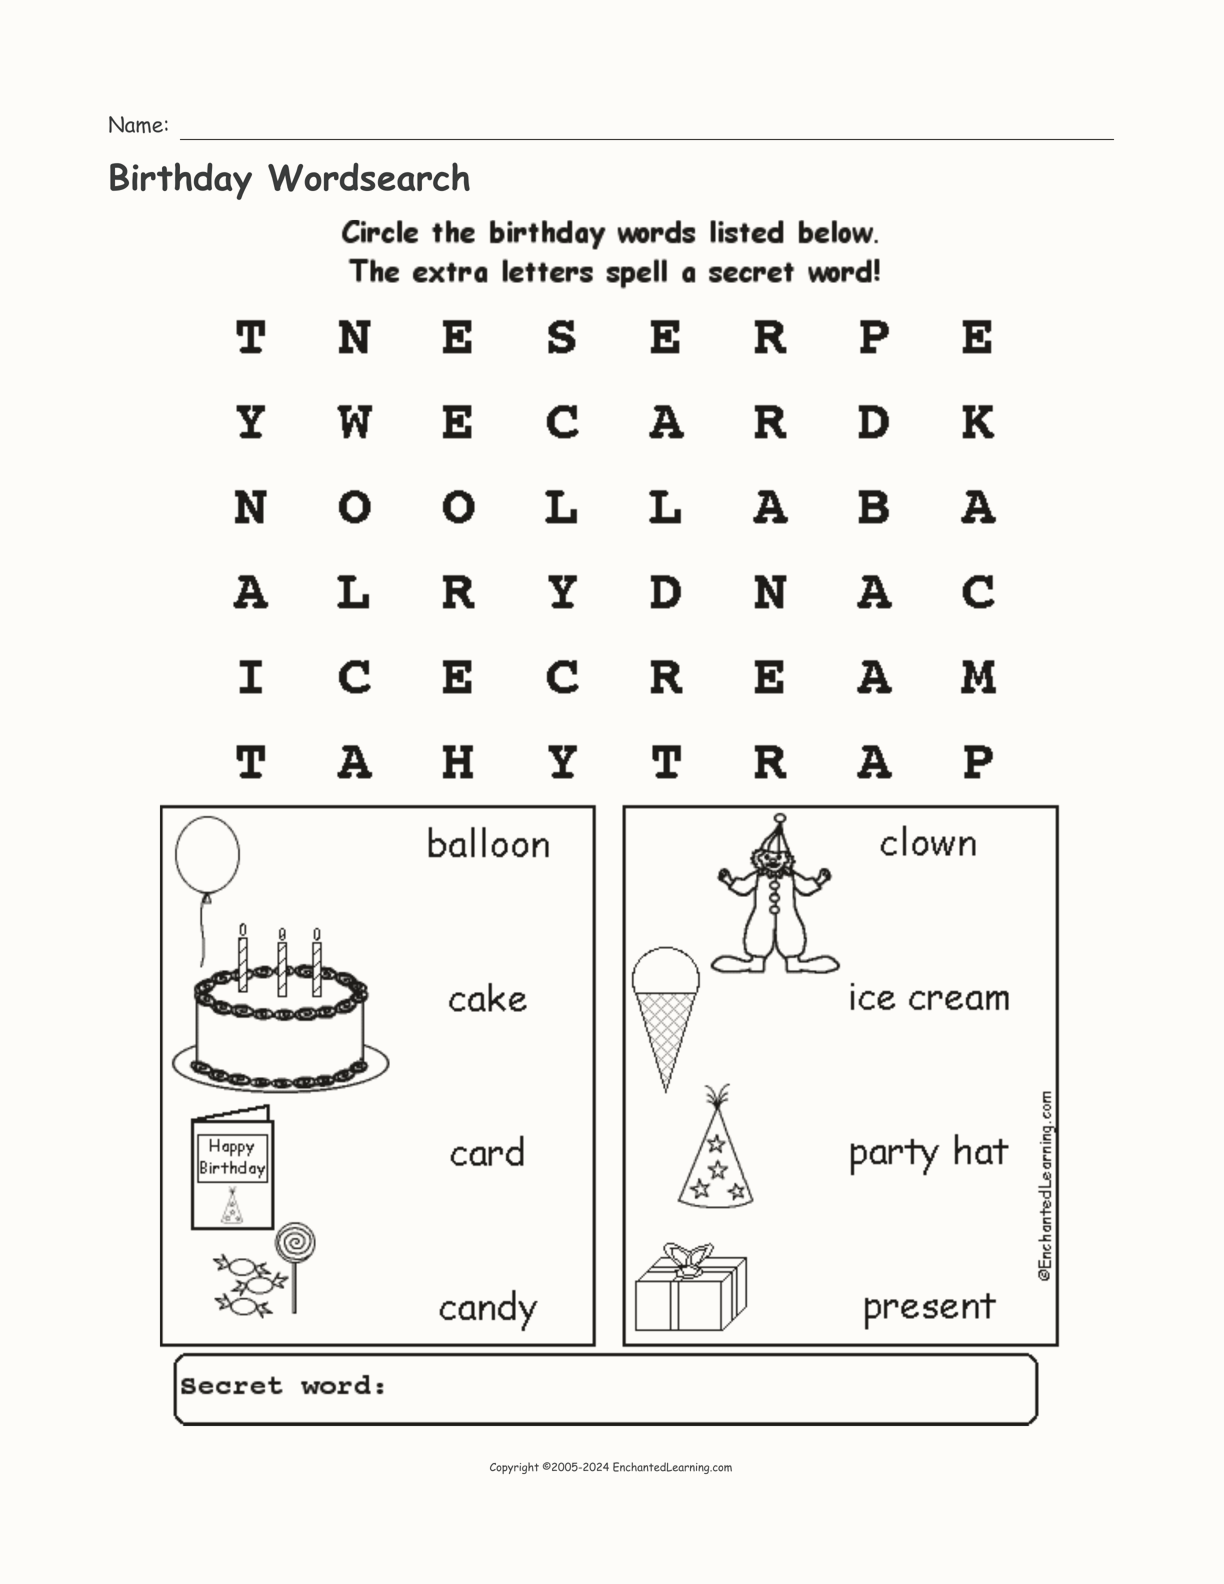 Birthday Wordsearch interactive worksheet page 1